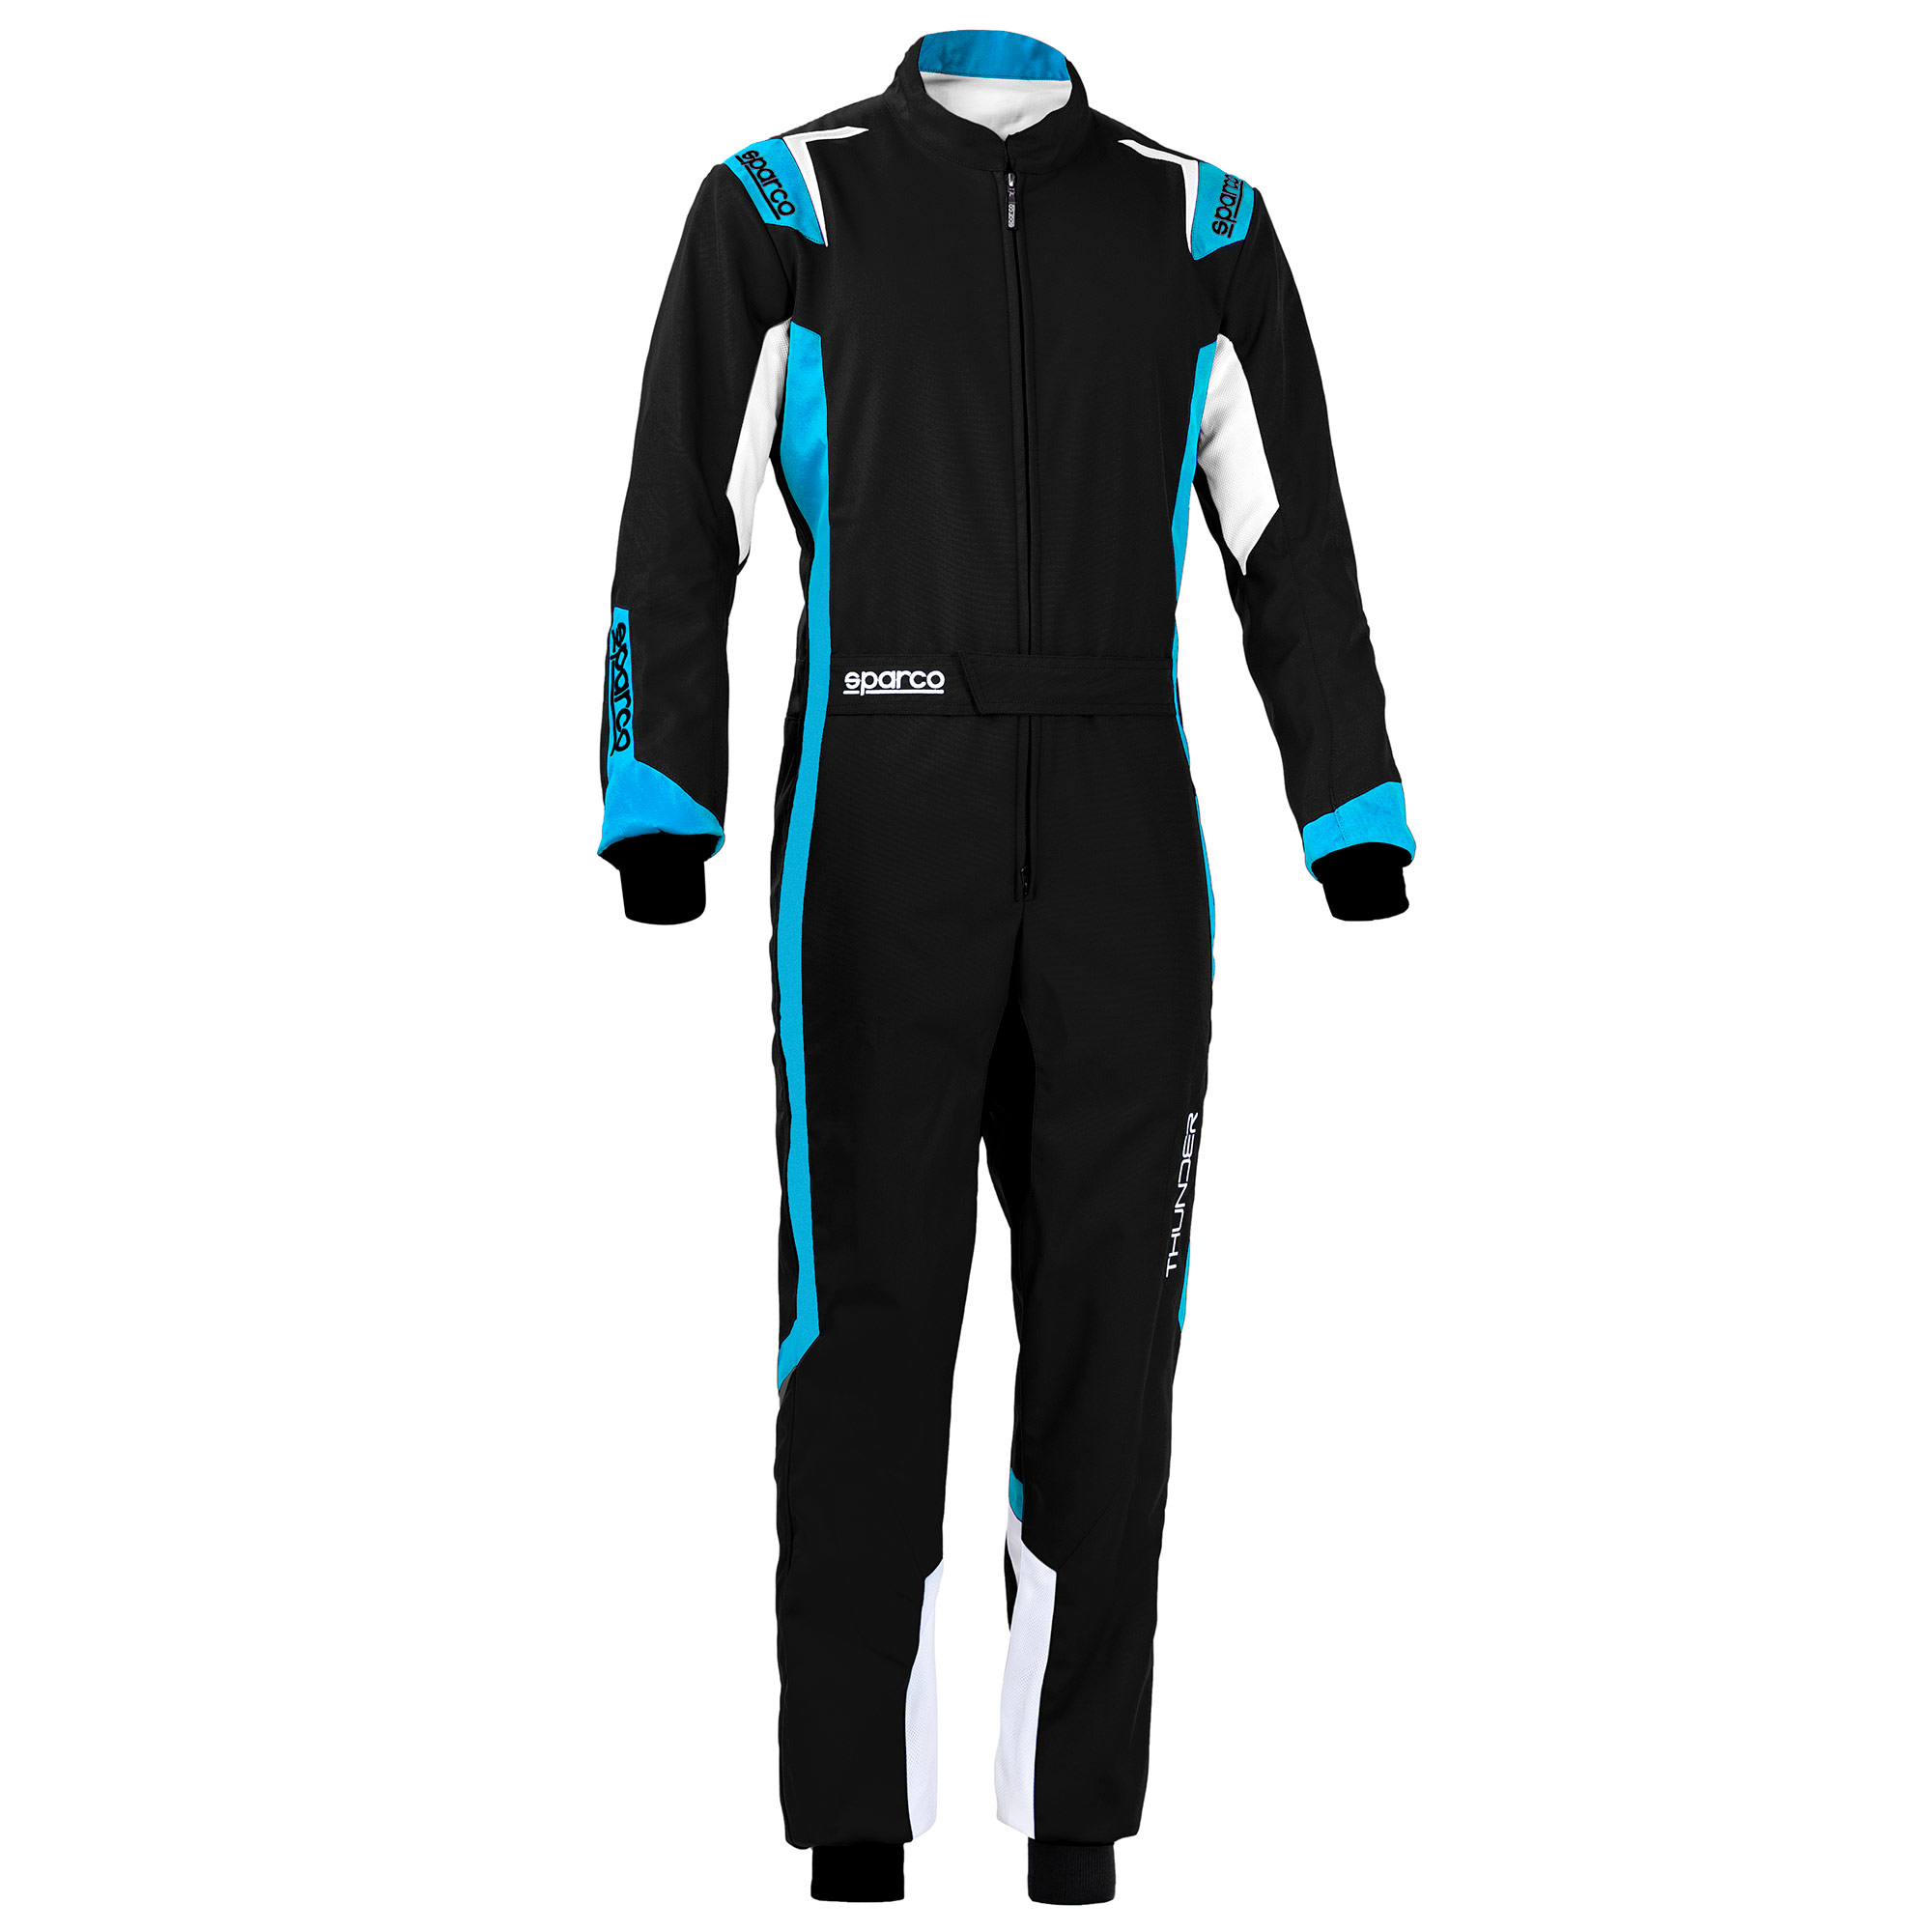 TOP KART GO KART RACE SUIT CIK/FIA LEVEL 2 APPROVED WITH FREE GIFTS INCLUDED 